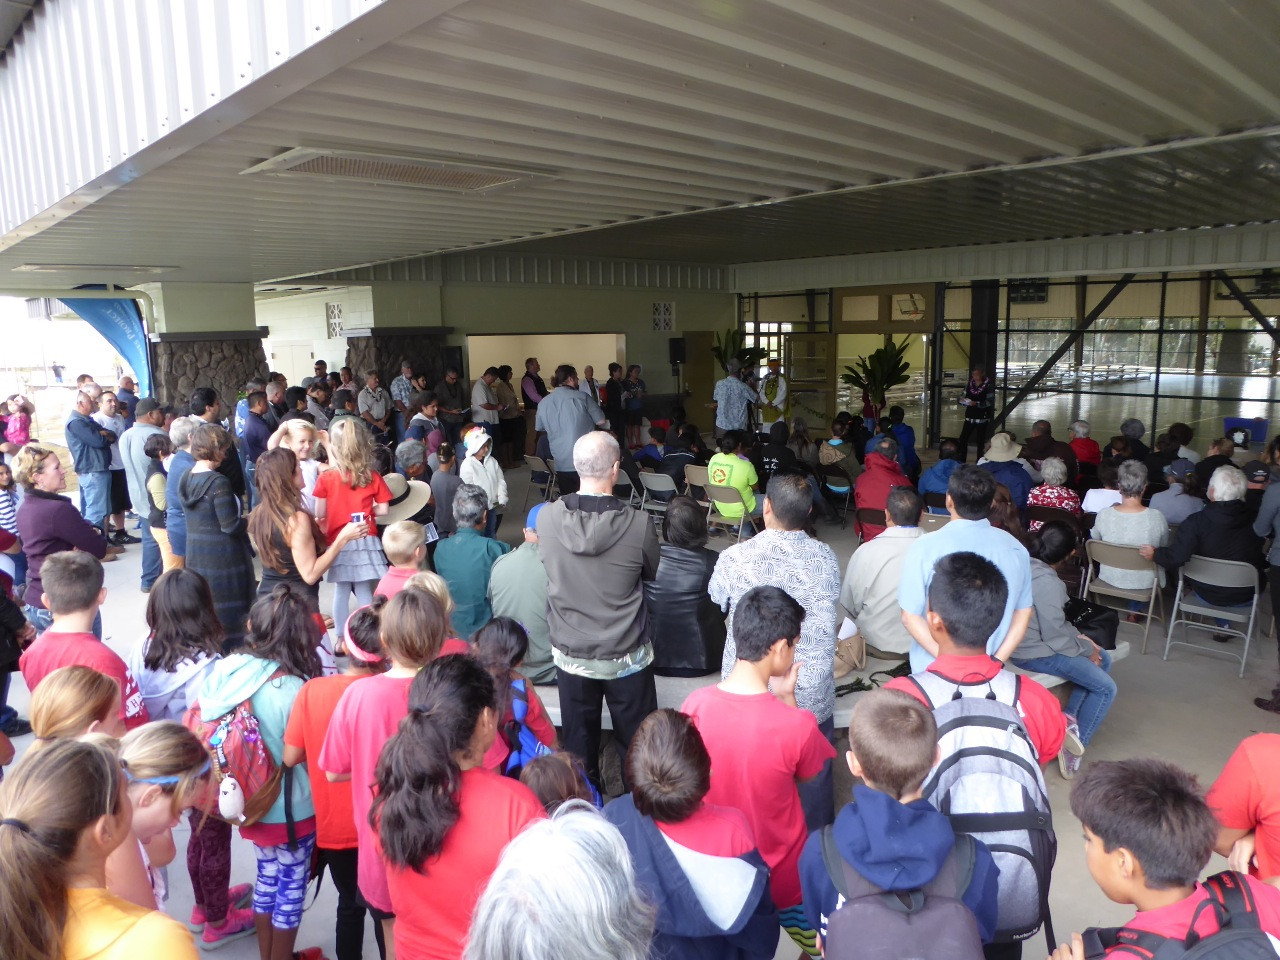 A big crowd gathered for the opening of the Waimea District Park. Image courtesy Visionary Video.